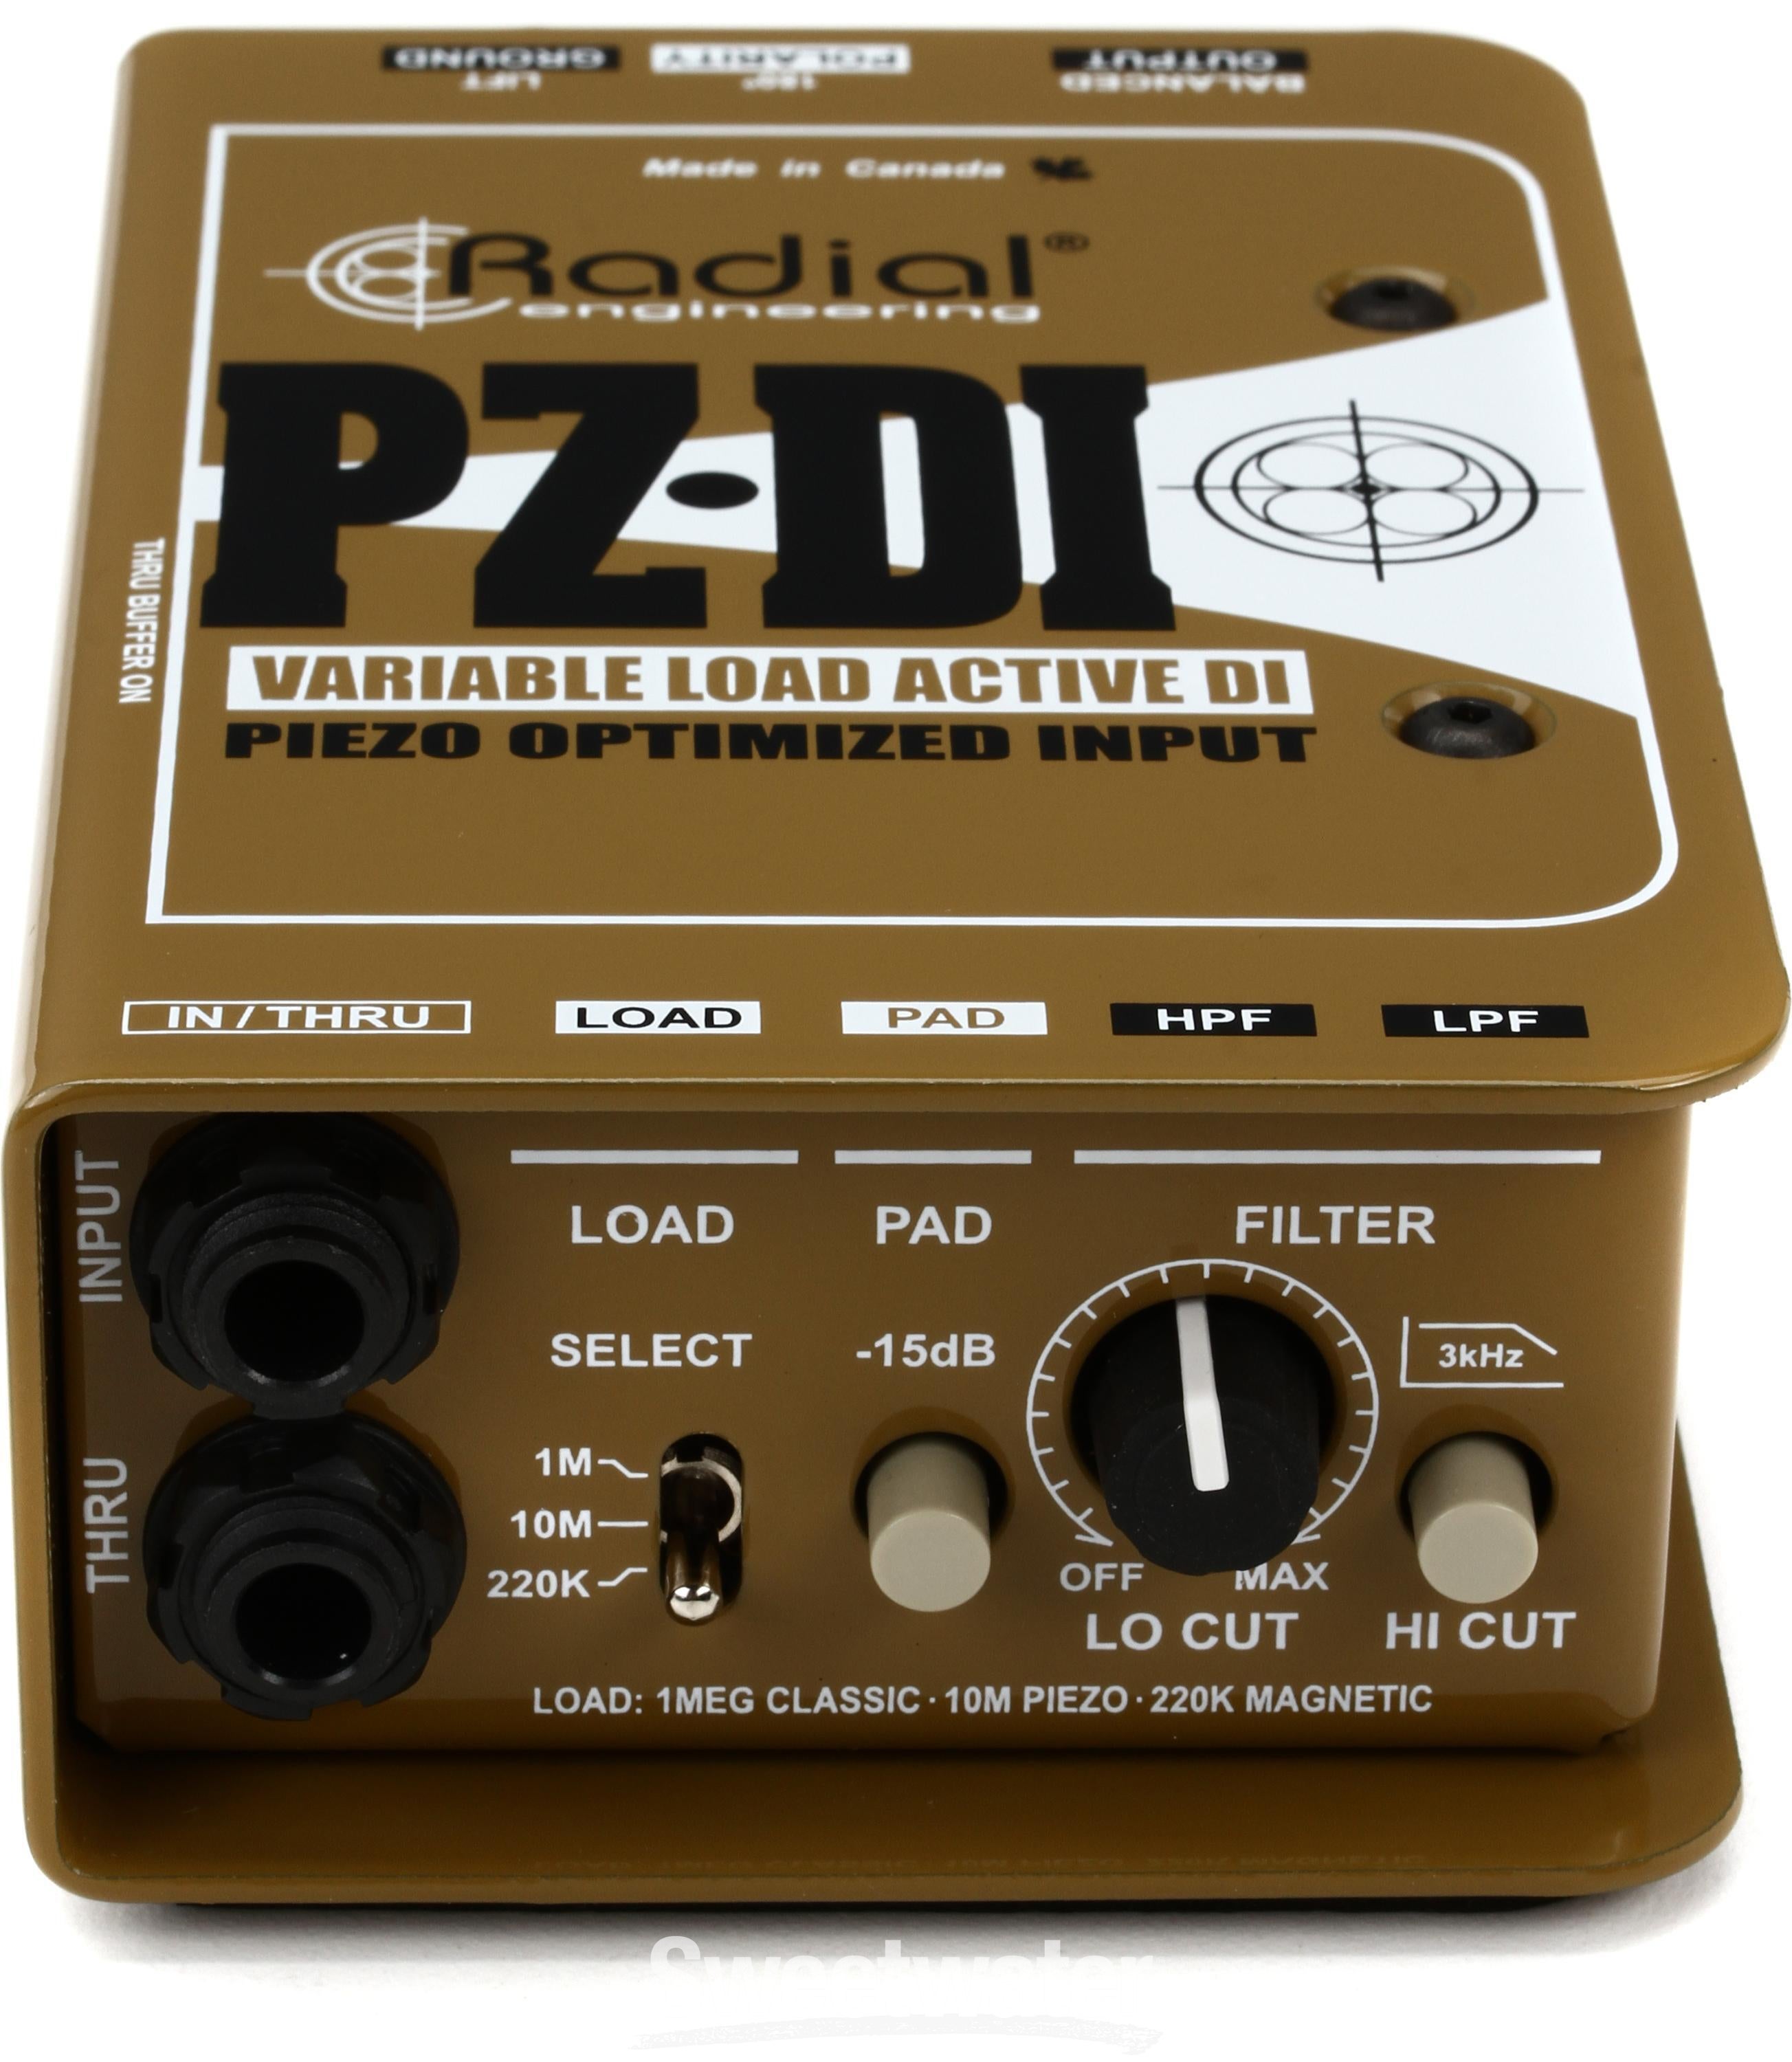 Radial PZ-DI Acoustic u0026 Orchestral Instrument Direct Box | Sweetwater